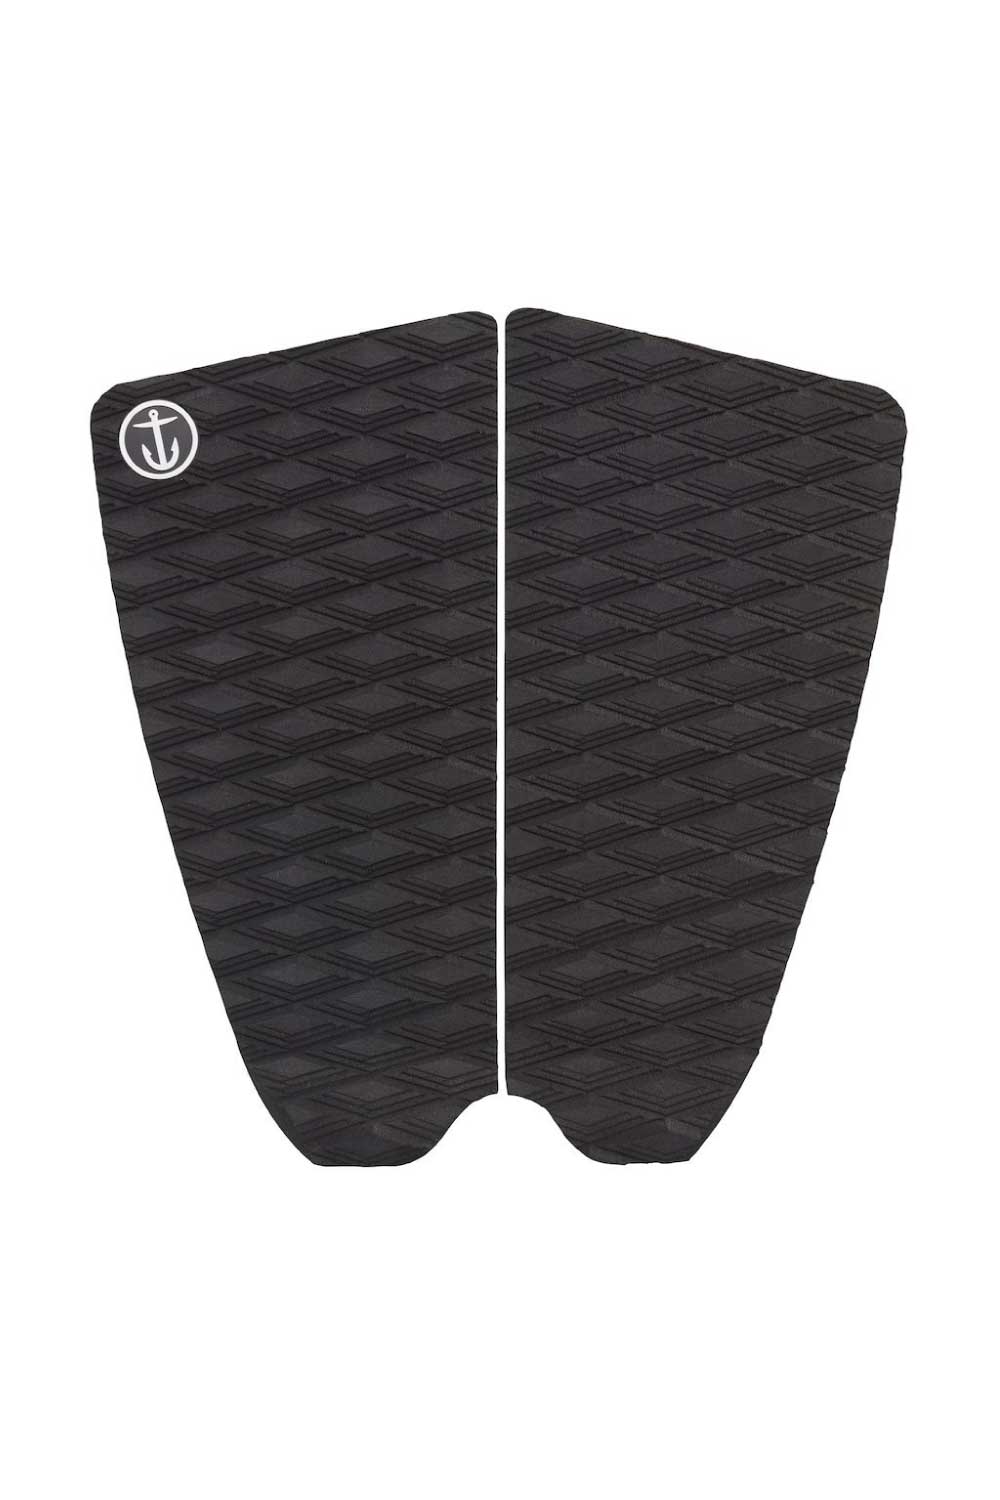 Captain Fin Co Infrantry Traction Pad